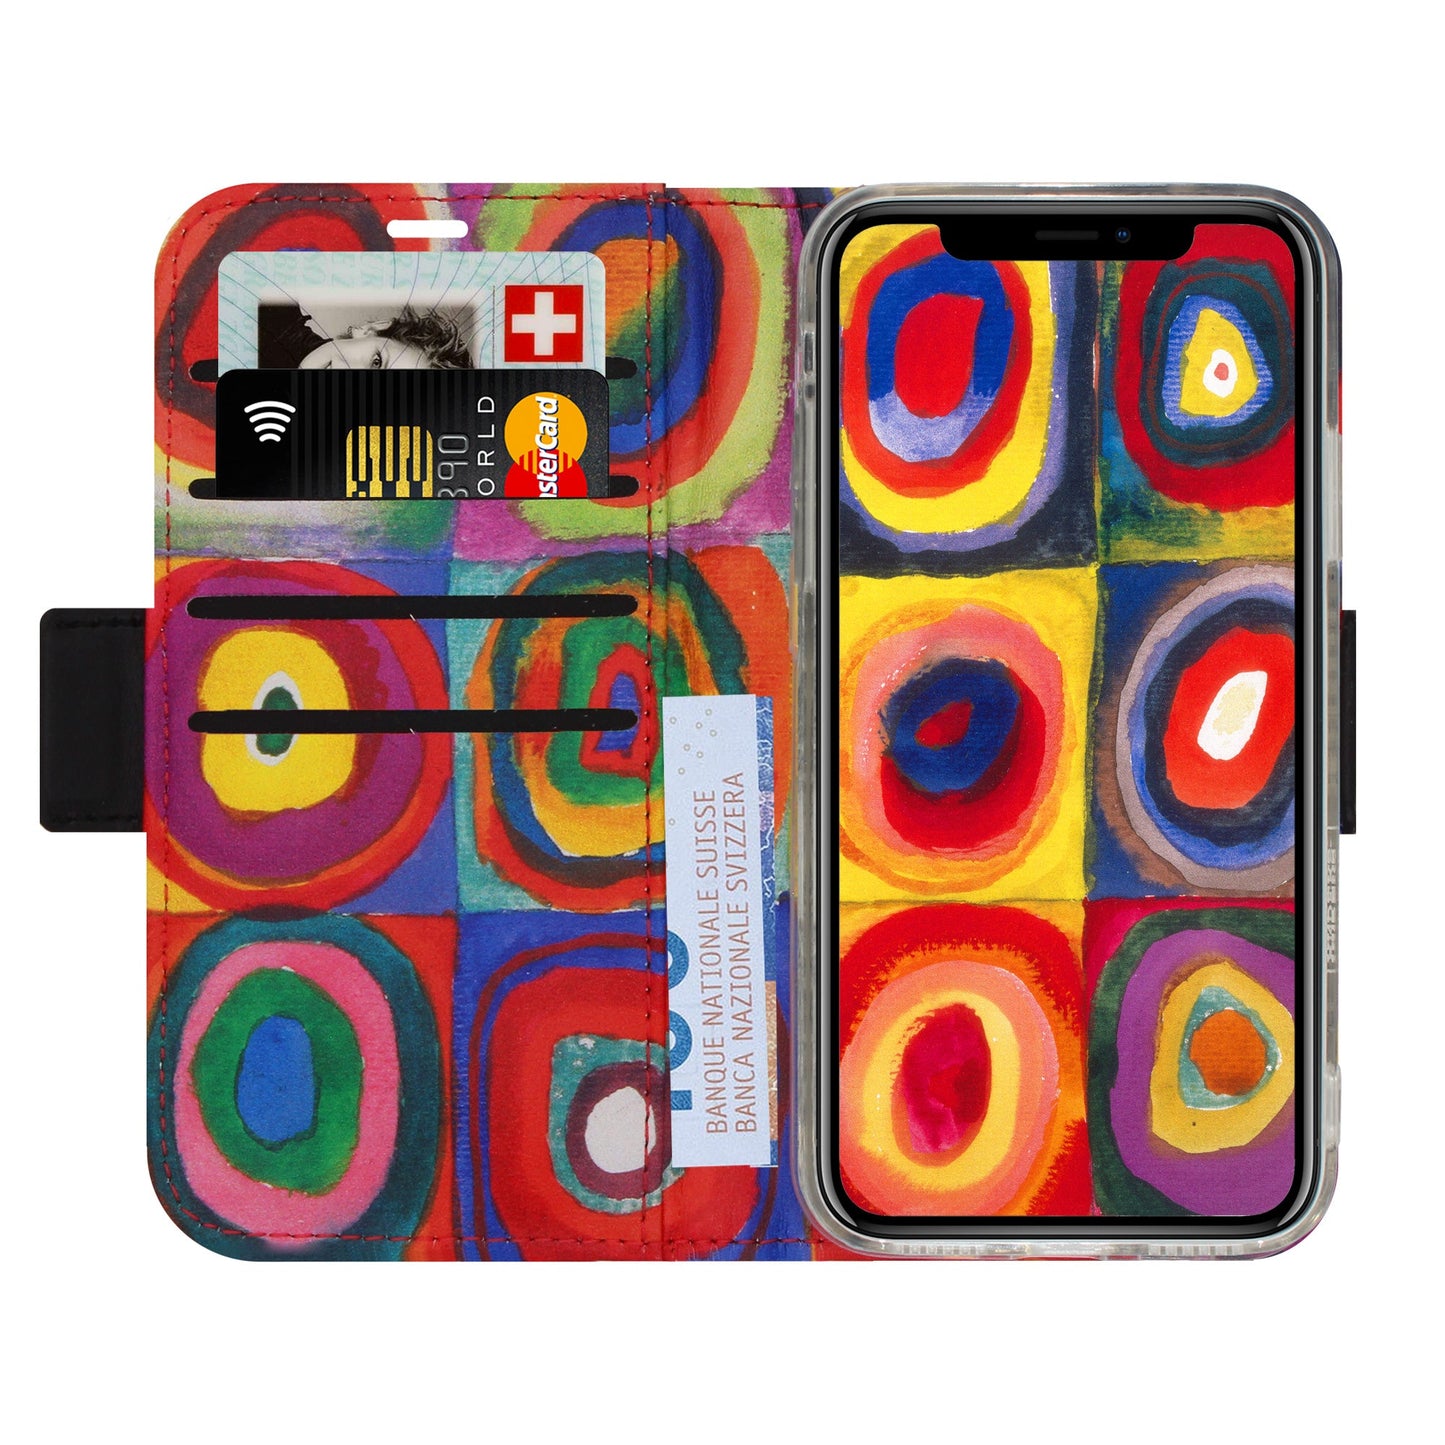 Coque Kandinsky Victor pour iPhone 12 Pro Max